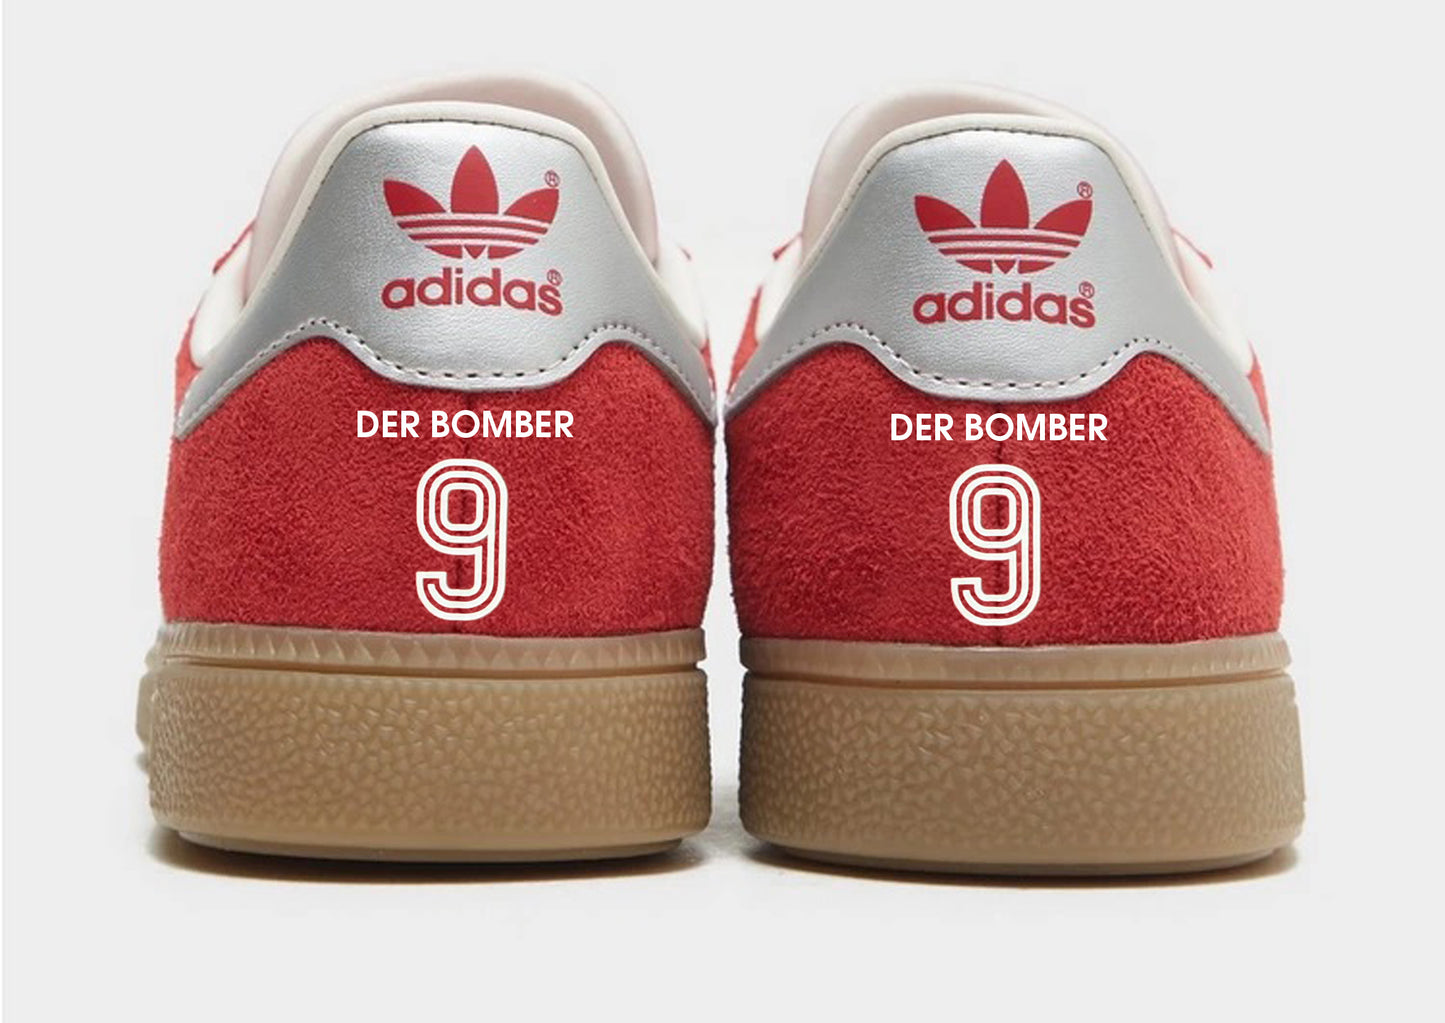 Limited edition Bayern Munich FC Gerd Muller Adidas Munchen red custom trainers / sneakers